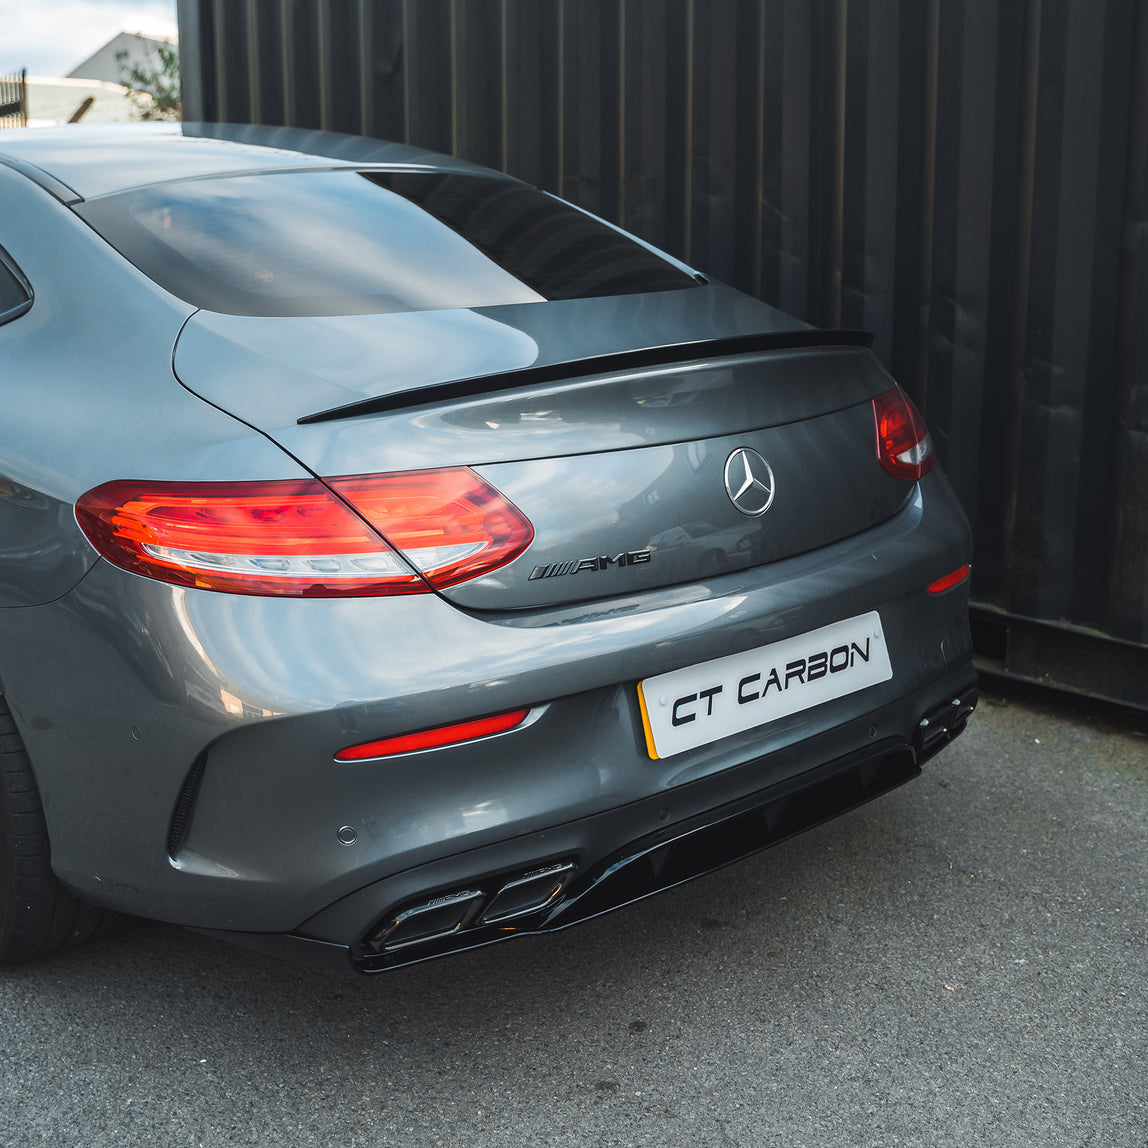 CT CARBON  MERCEDES C-CLASS COUPE W205 GLOSS BLACK DIFFUSER & TIPS – CT  Carbon